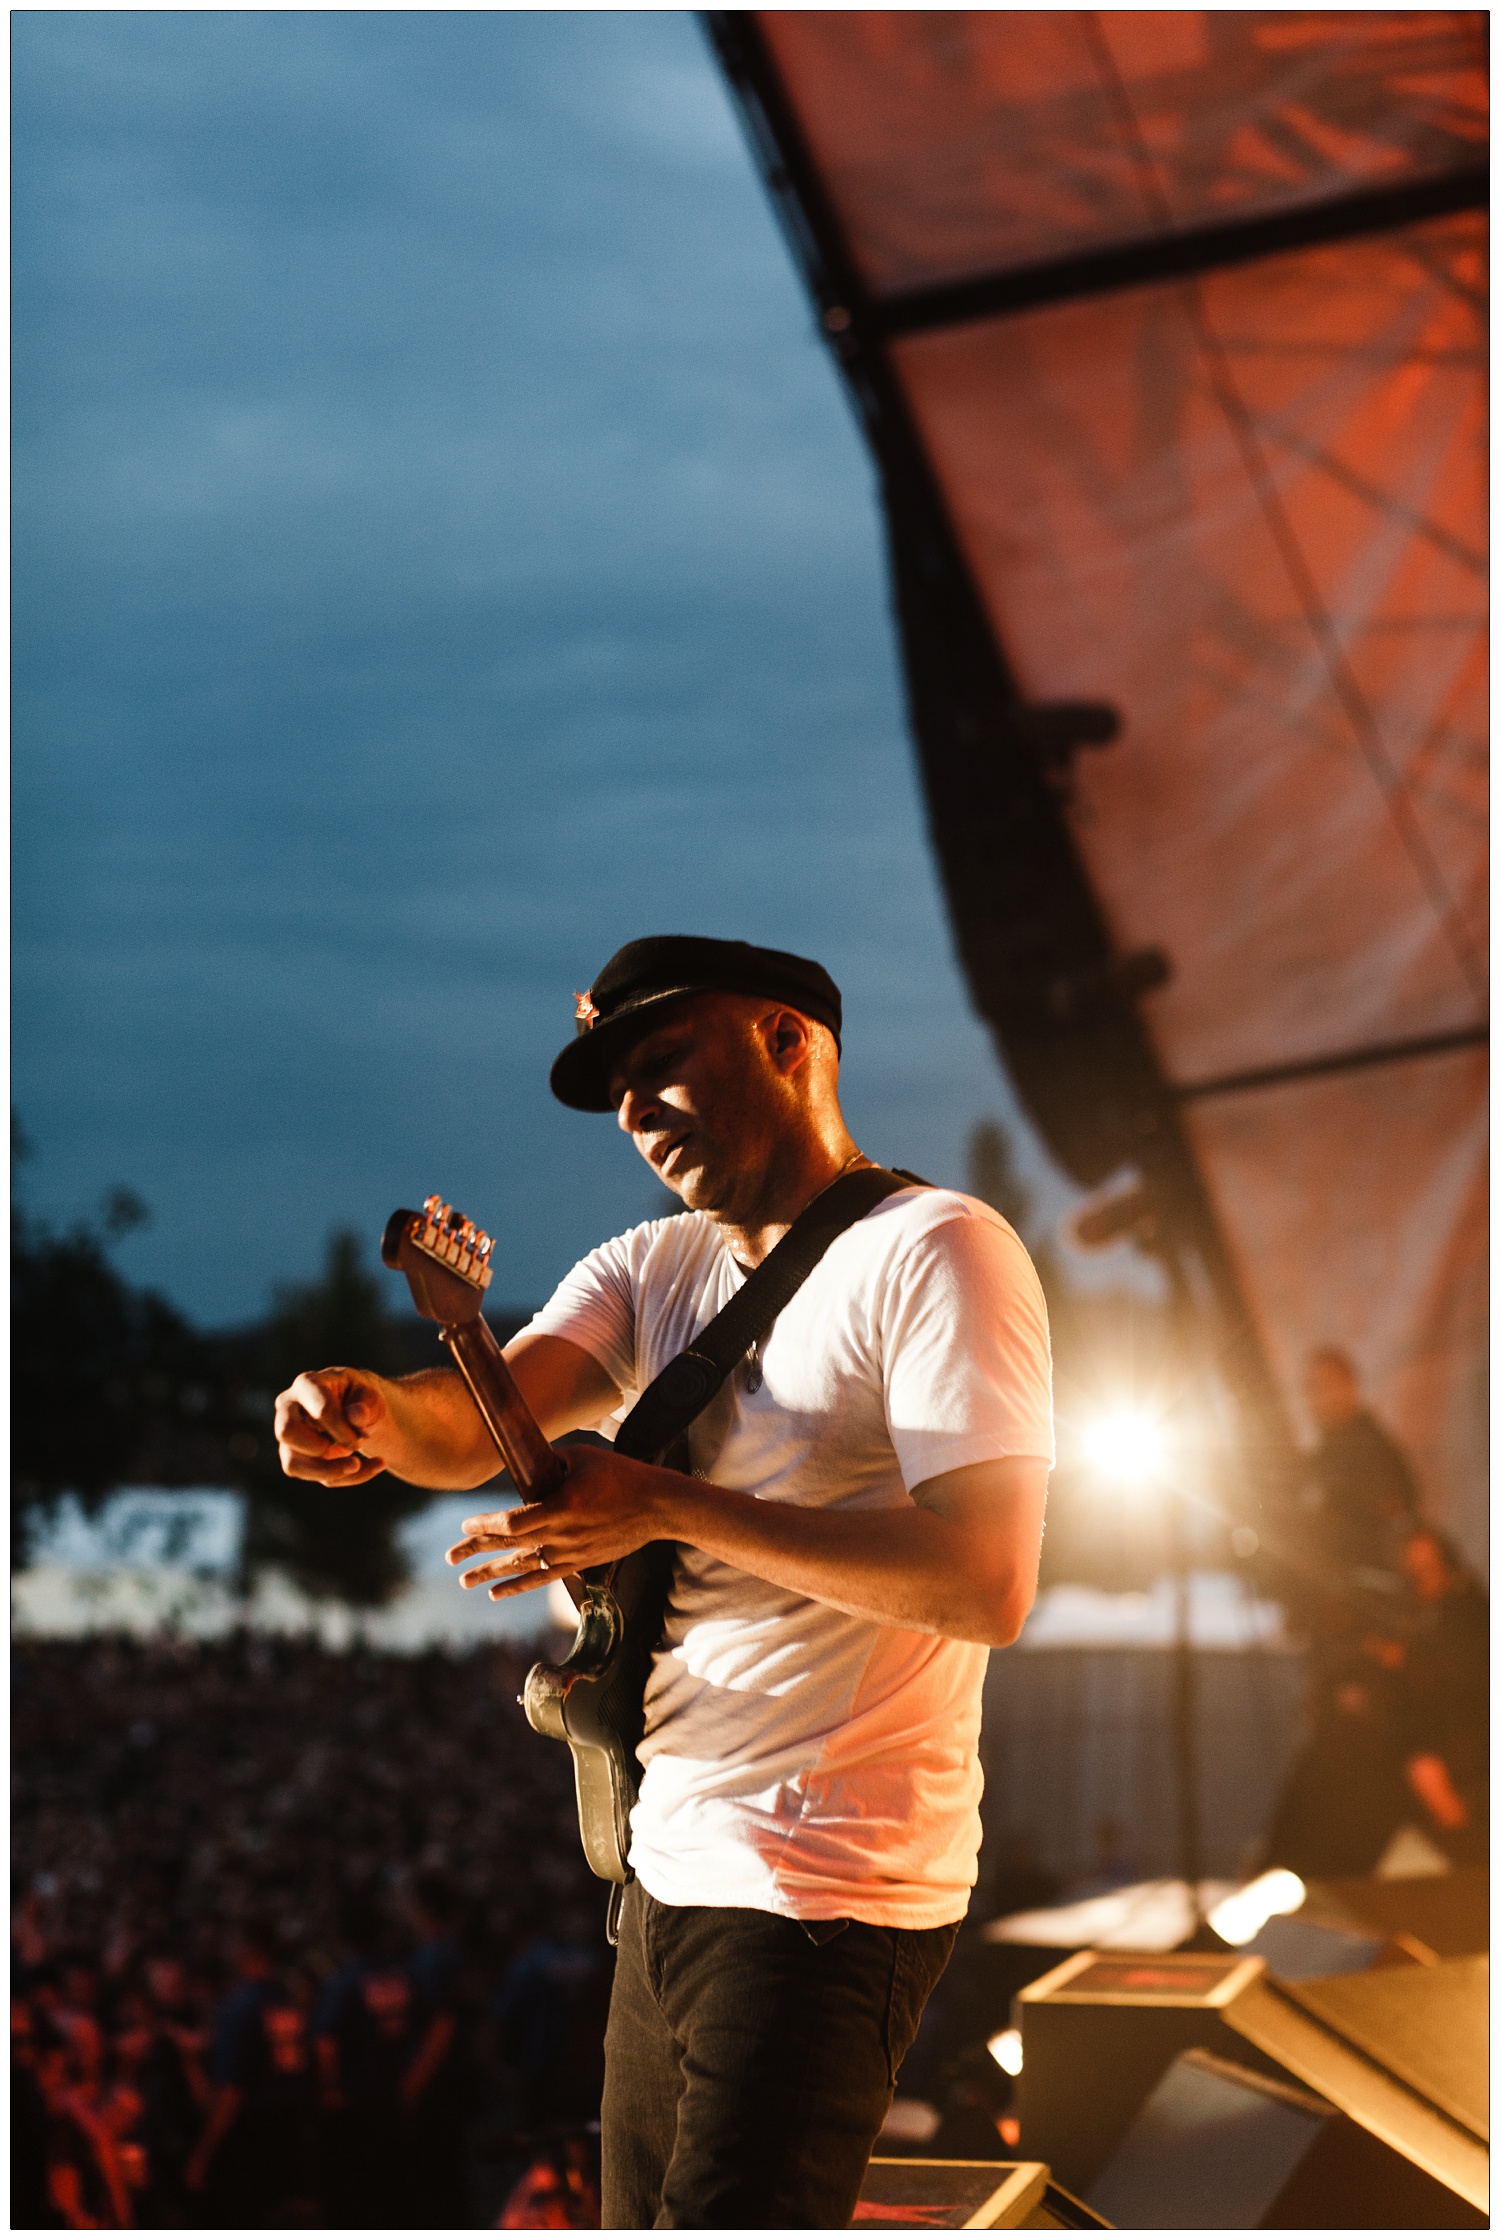 A view of the sky, the crowd and lights, as Tom Morello plays at the Rage Against The Machine gig in Finsbury Park